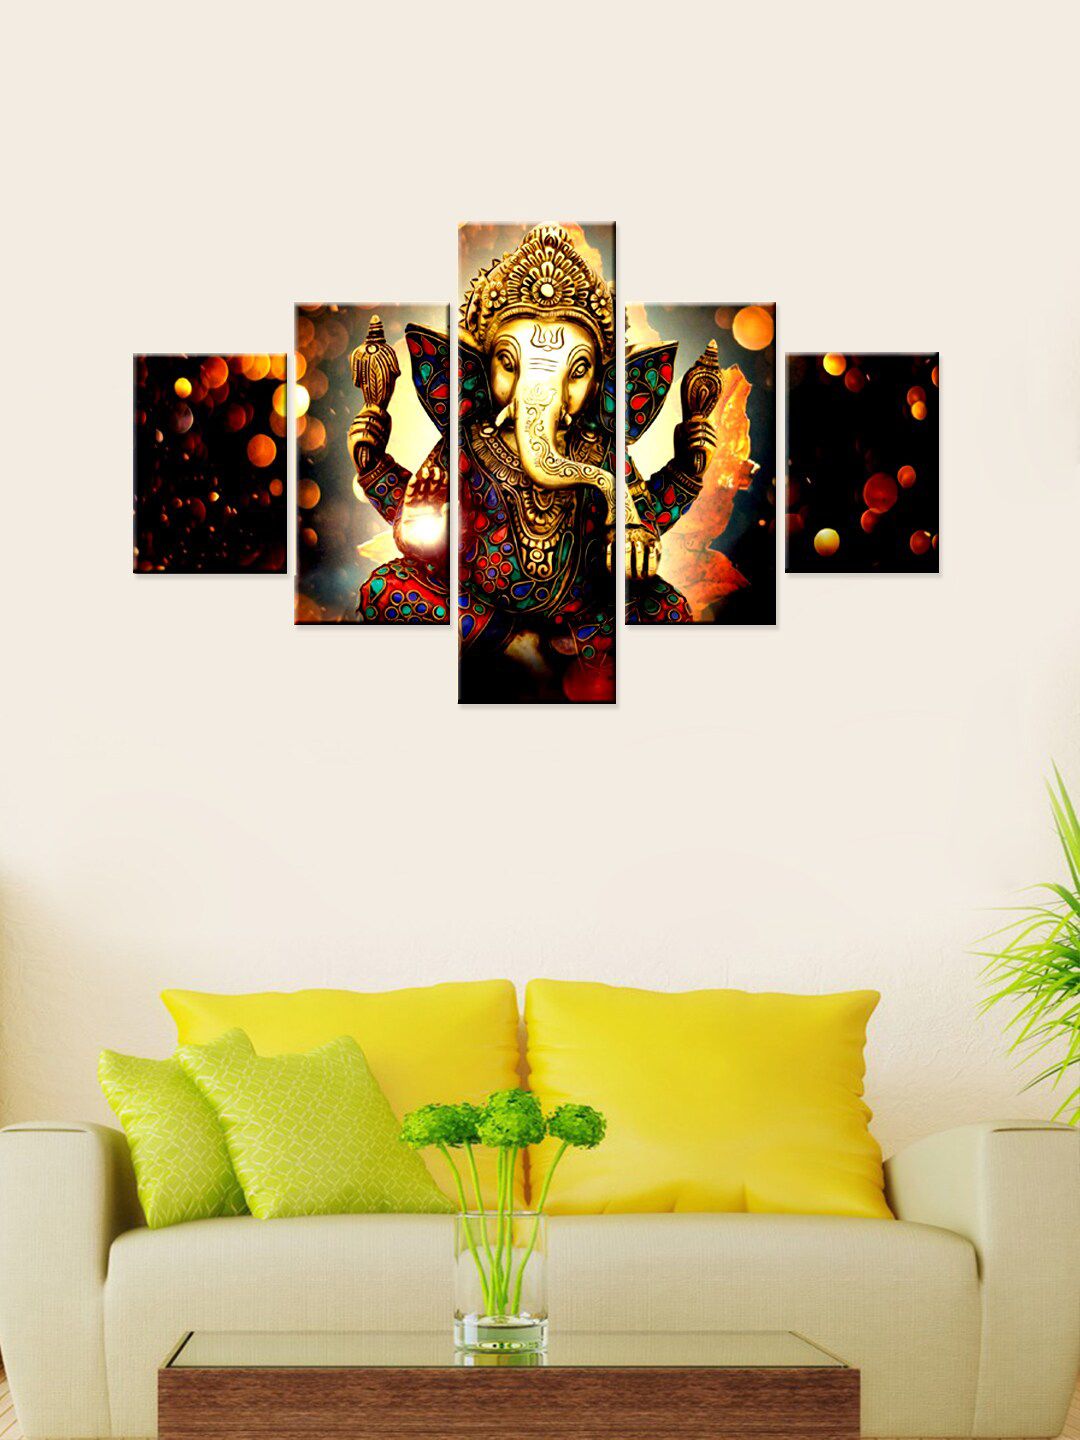 WALLMANTRA Gold & Grey Set of 5 Lord Ganesha Canvas Wall Painting Price in India